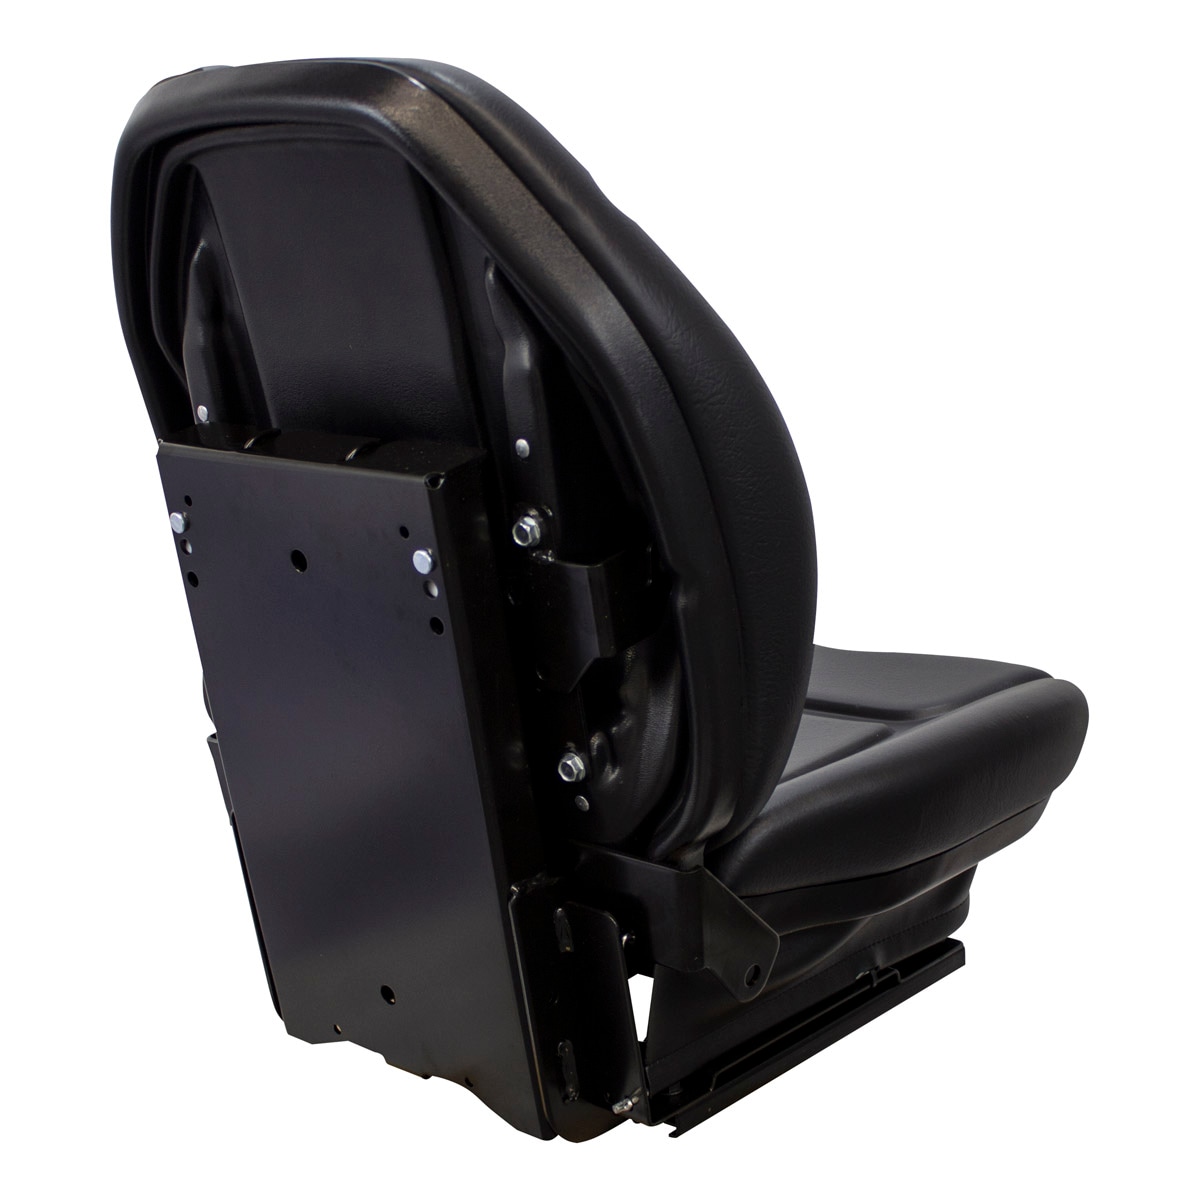 KM 336 Replacement Cushion Kit Construction Seat in the Riding Lawn Mower  Accessories department at